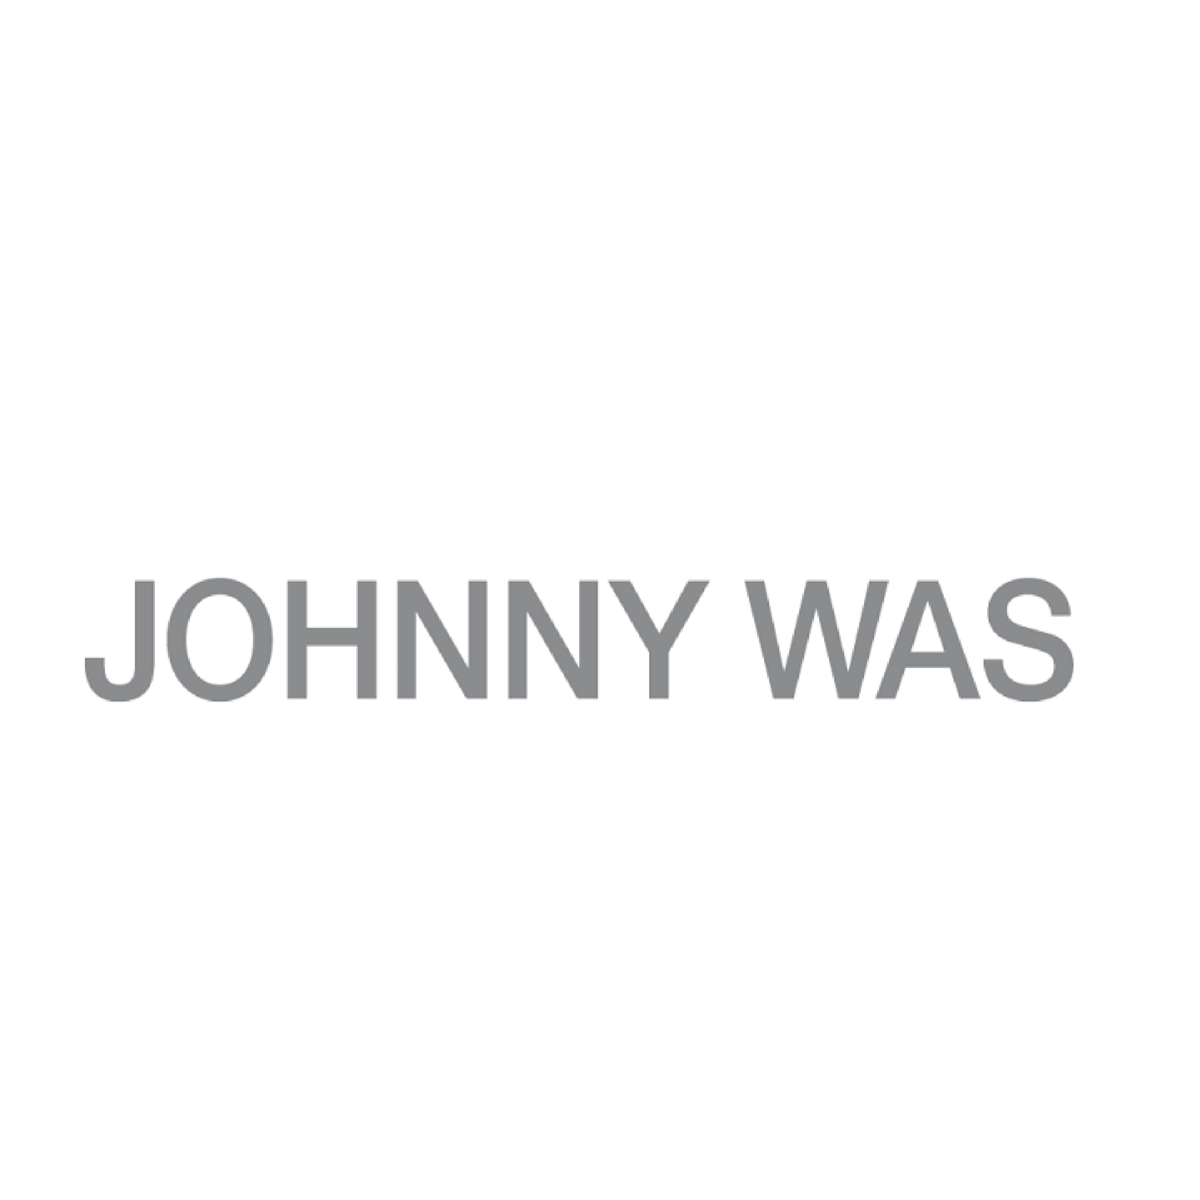 Johnny was